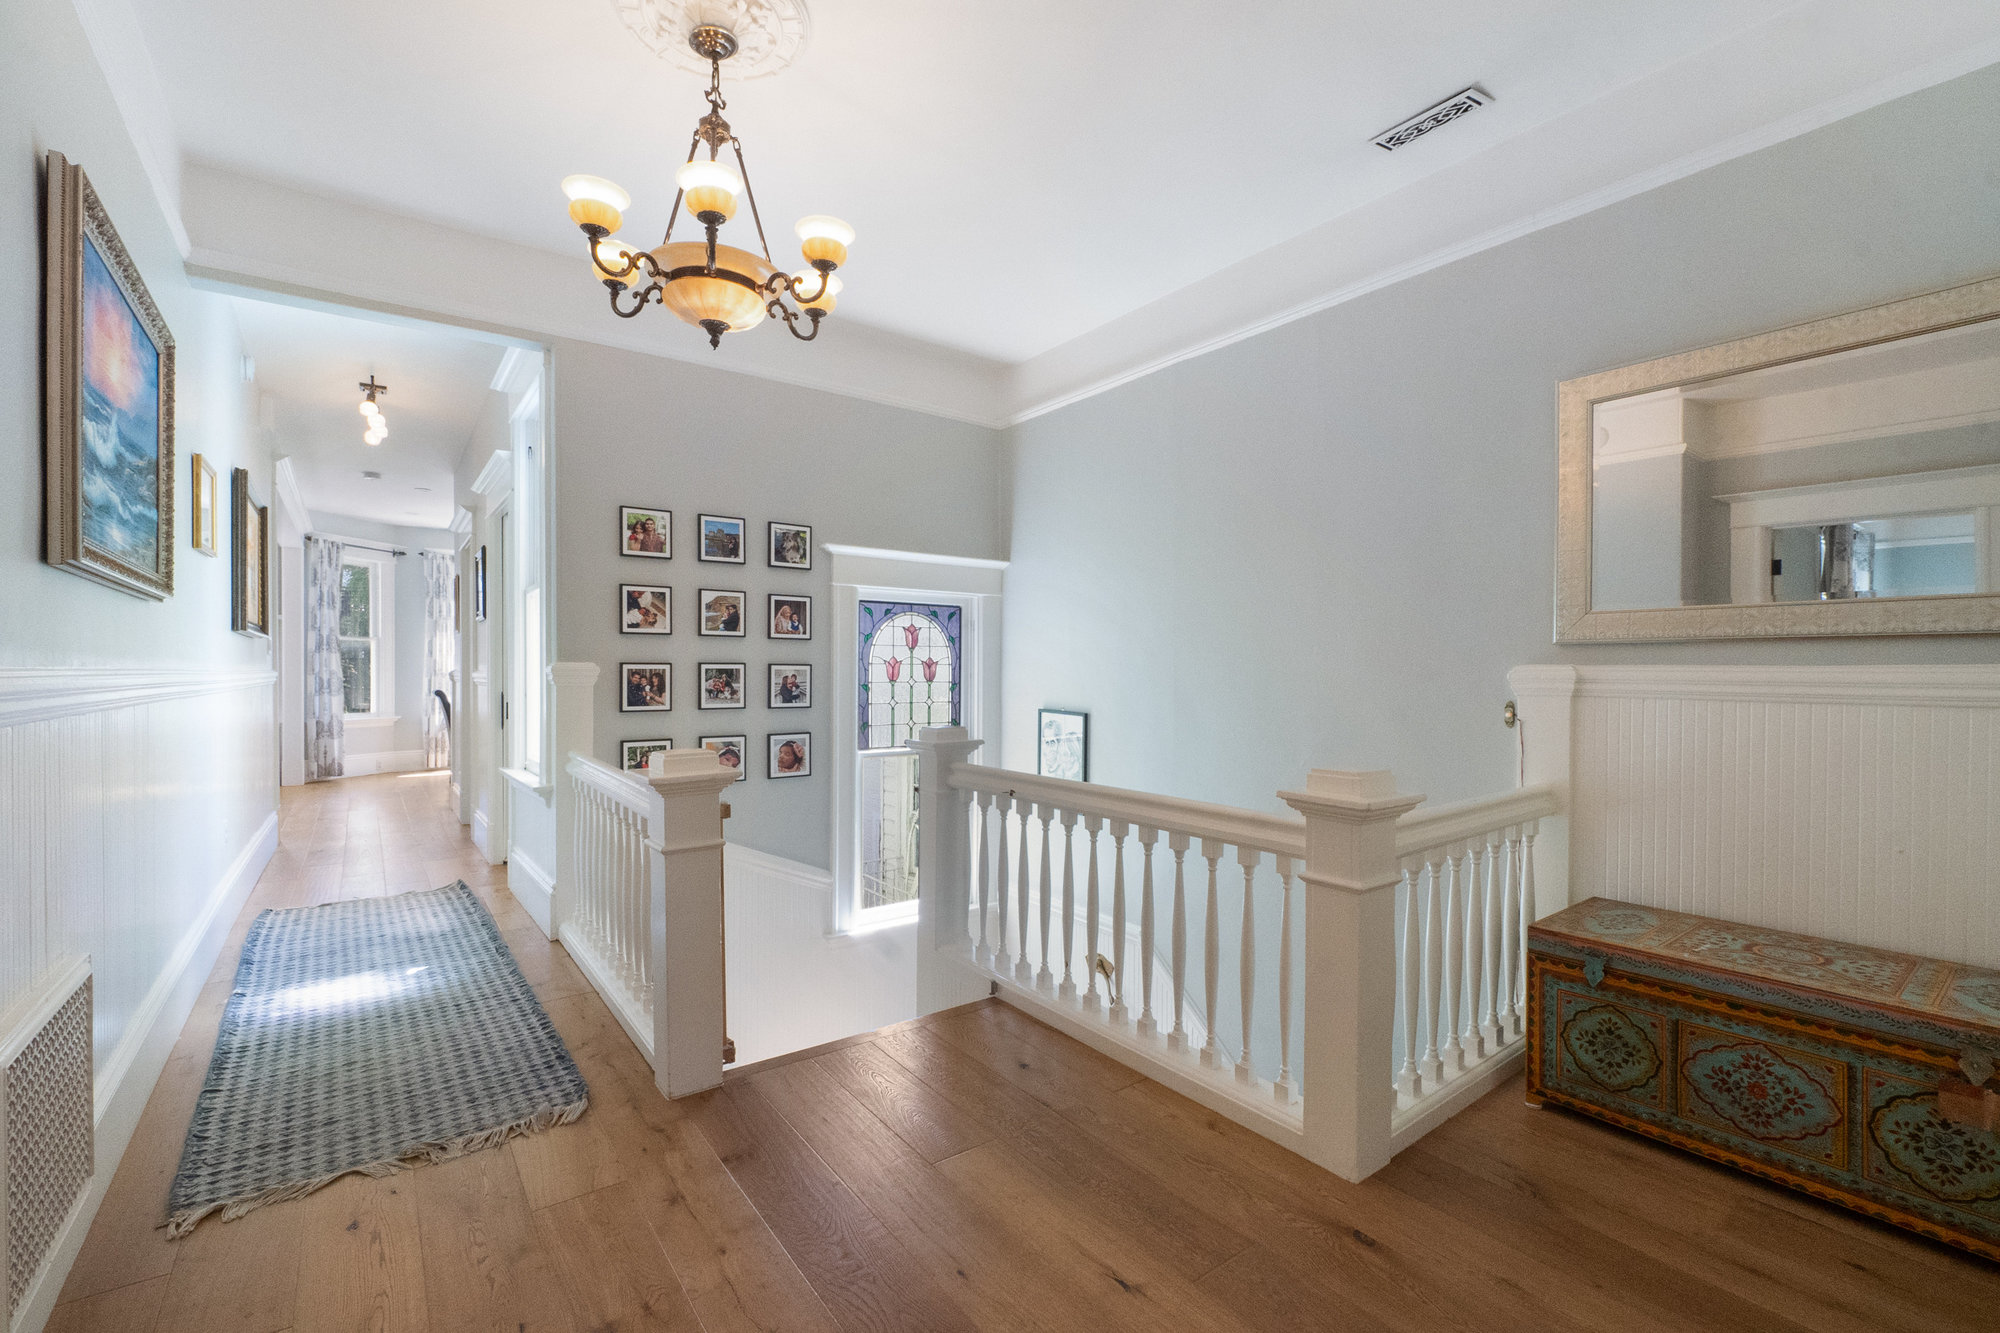 Property Photo: Hallway view of the white wood railing and vaulted stairwell 